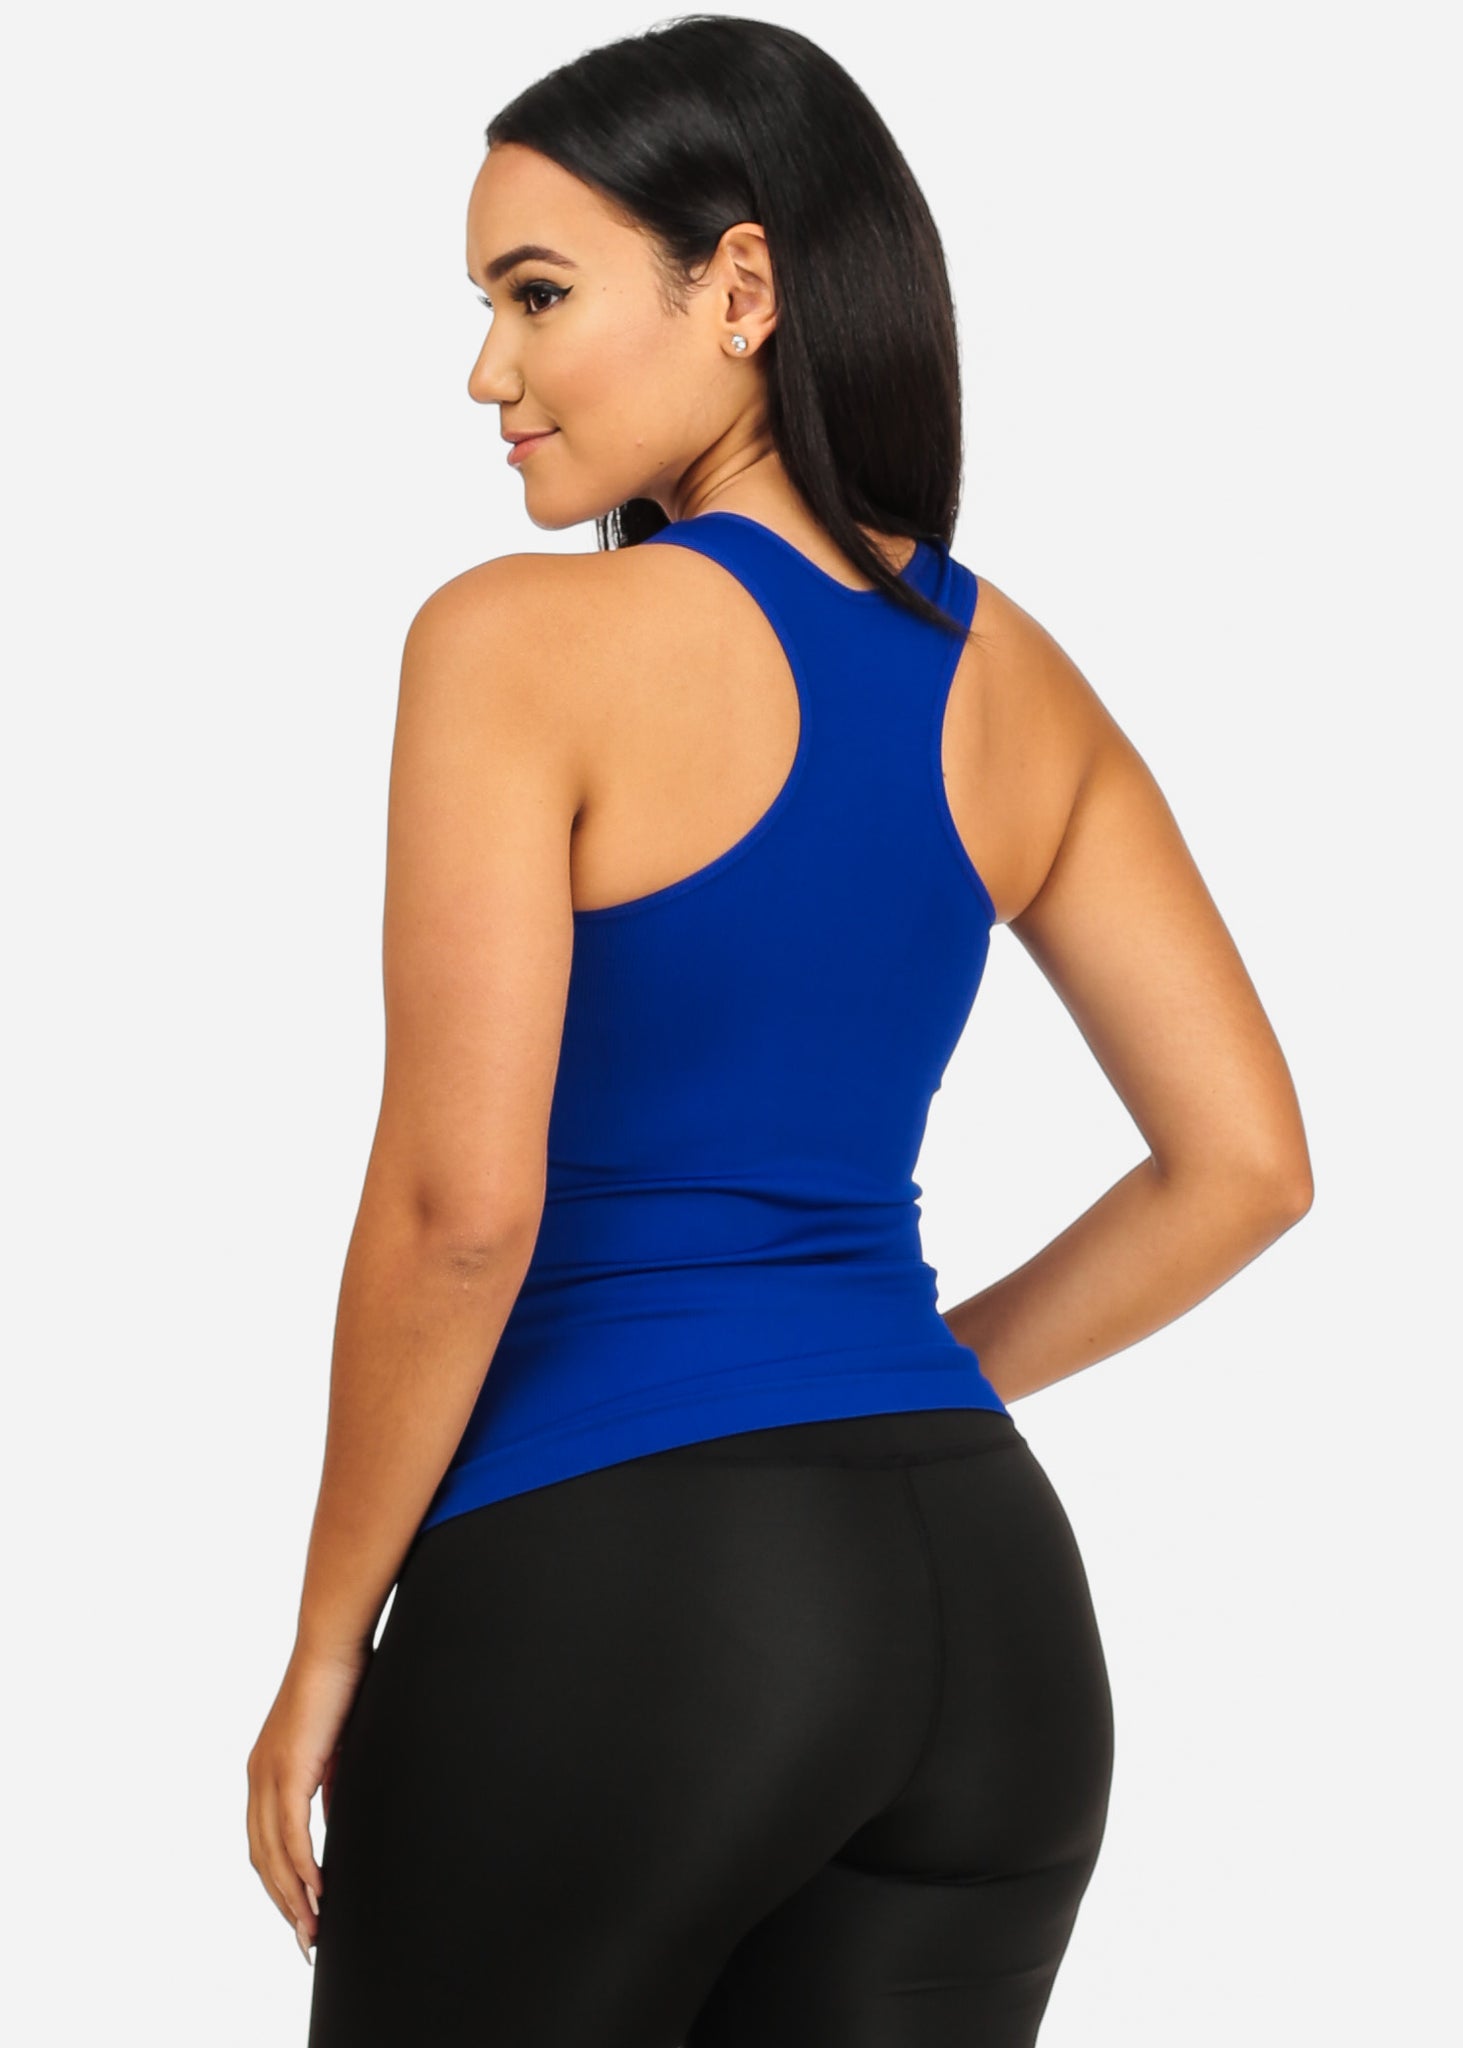 Stretchy Spandex Women's Royal Blue Color Tank Top CC-0531 – One